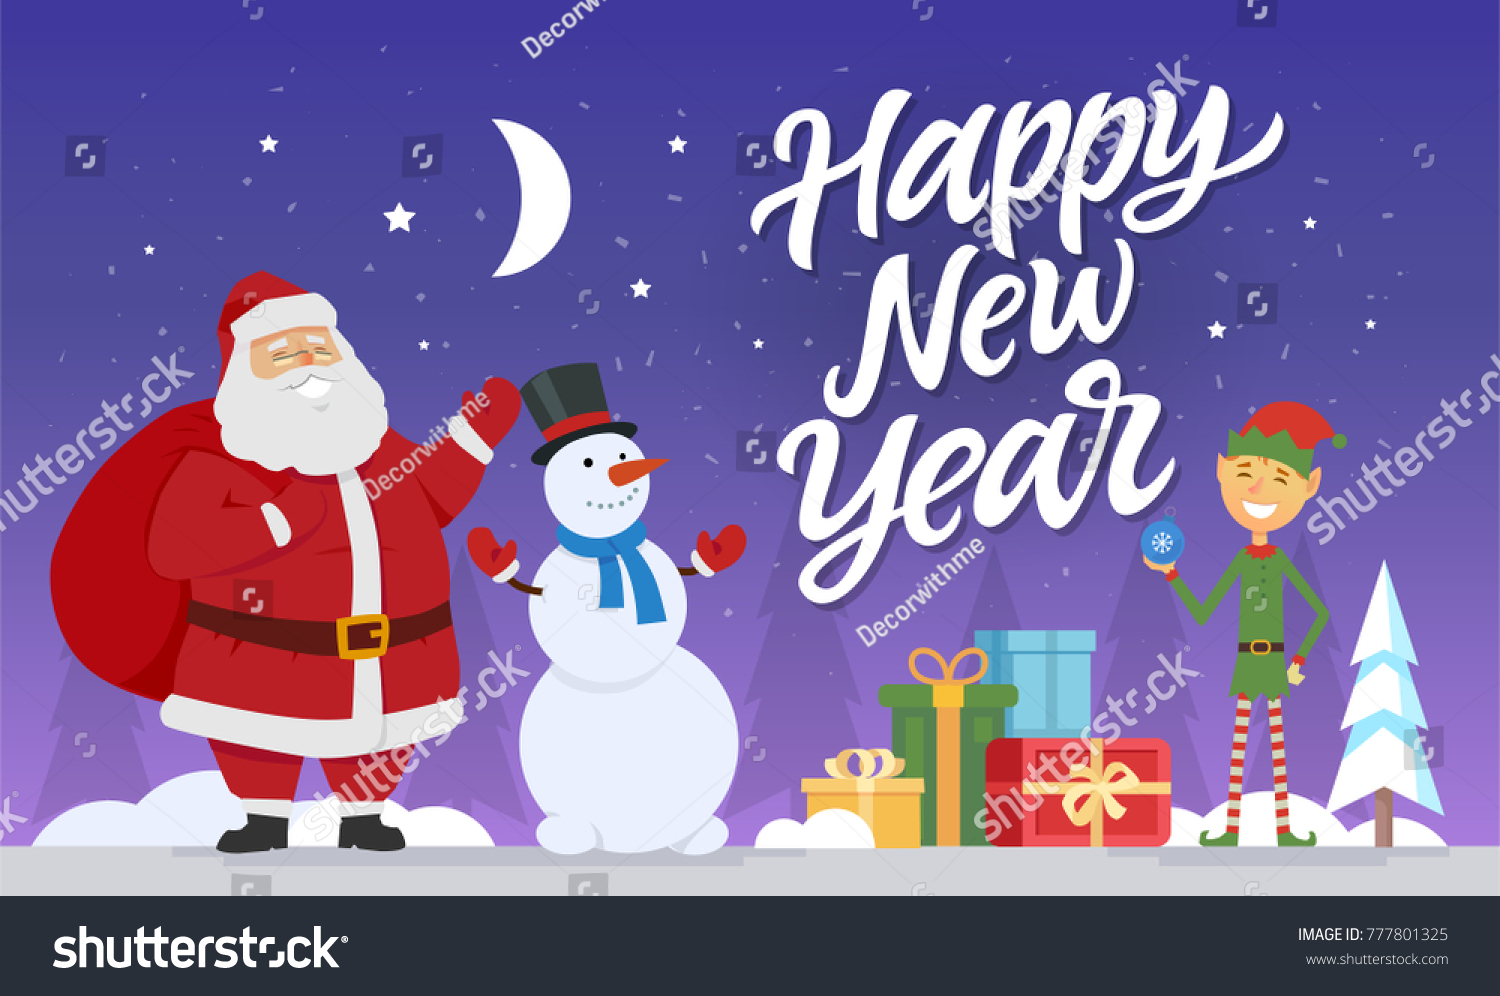 Happy New Year - modern cartoon characters illustration with hand drawn brush pen lettering. Santa Claus with snowman and elf standing with presents in a night winter forest. Stars and moon in the sky #777801325